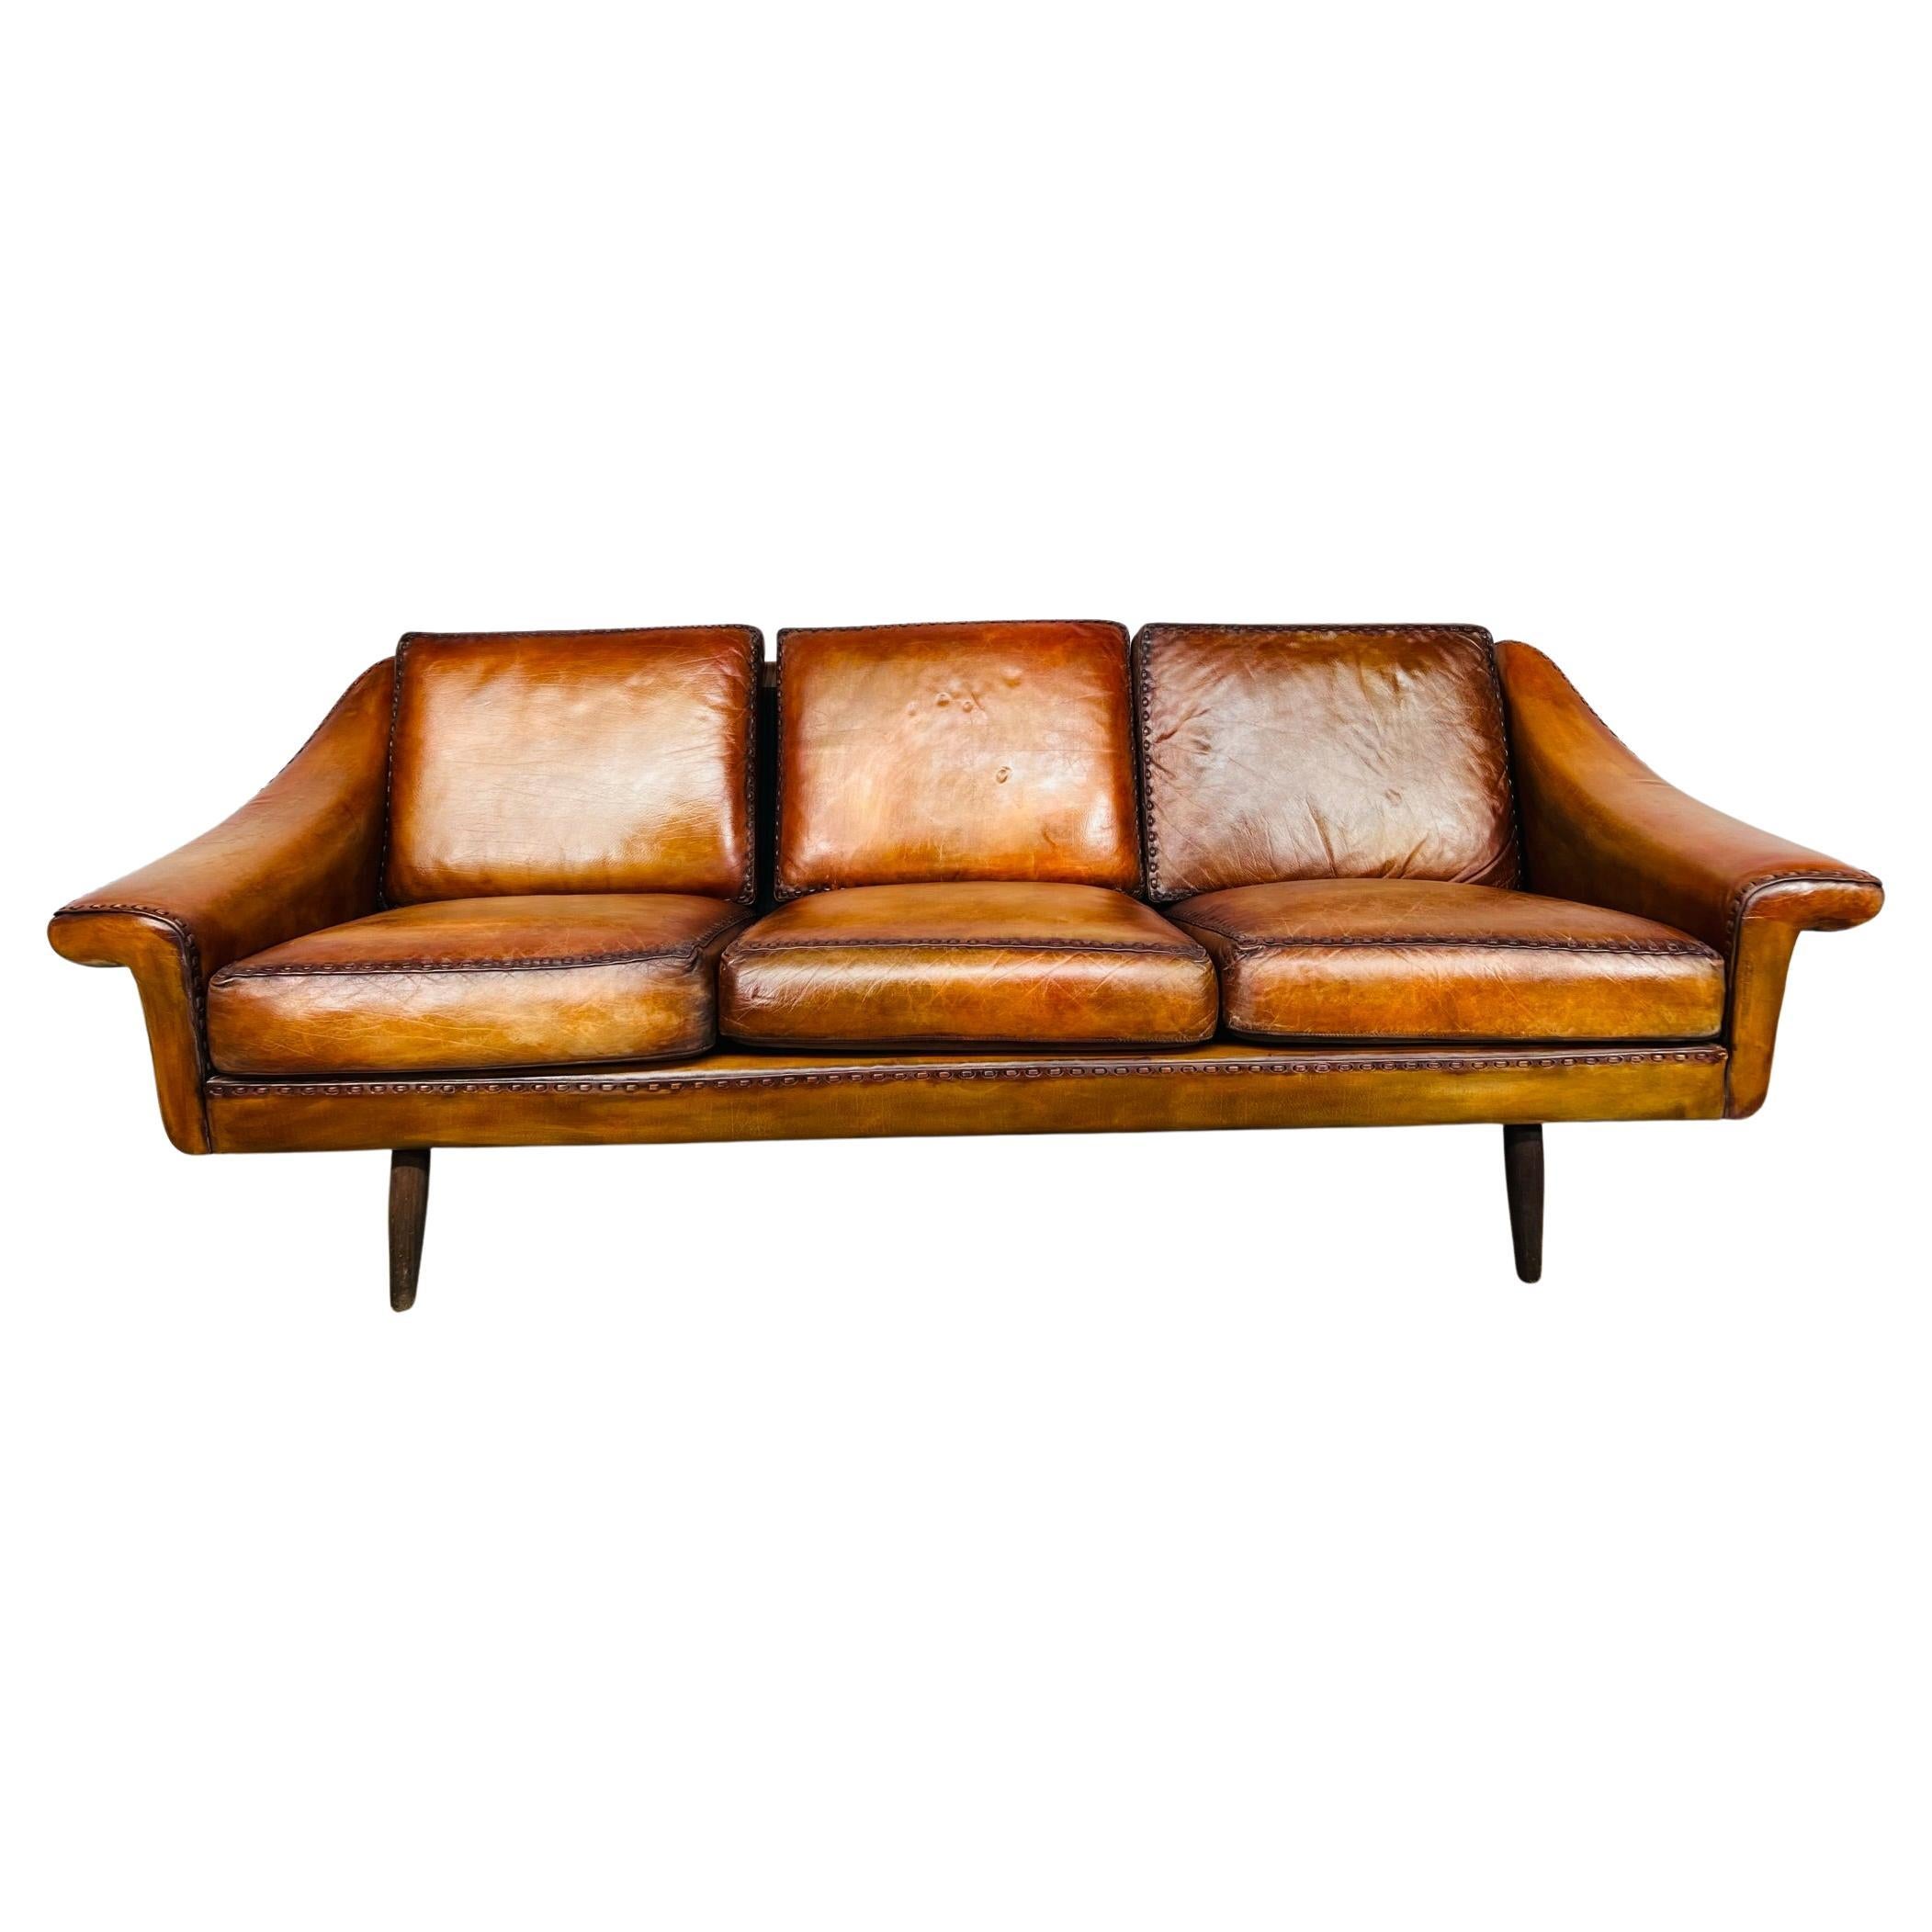 Matador Leather 3 Seater Sofa by Aage Christiansen for Eran 1960s #642 For Sale